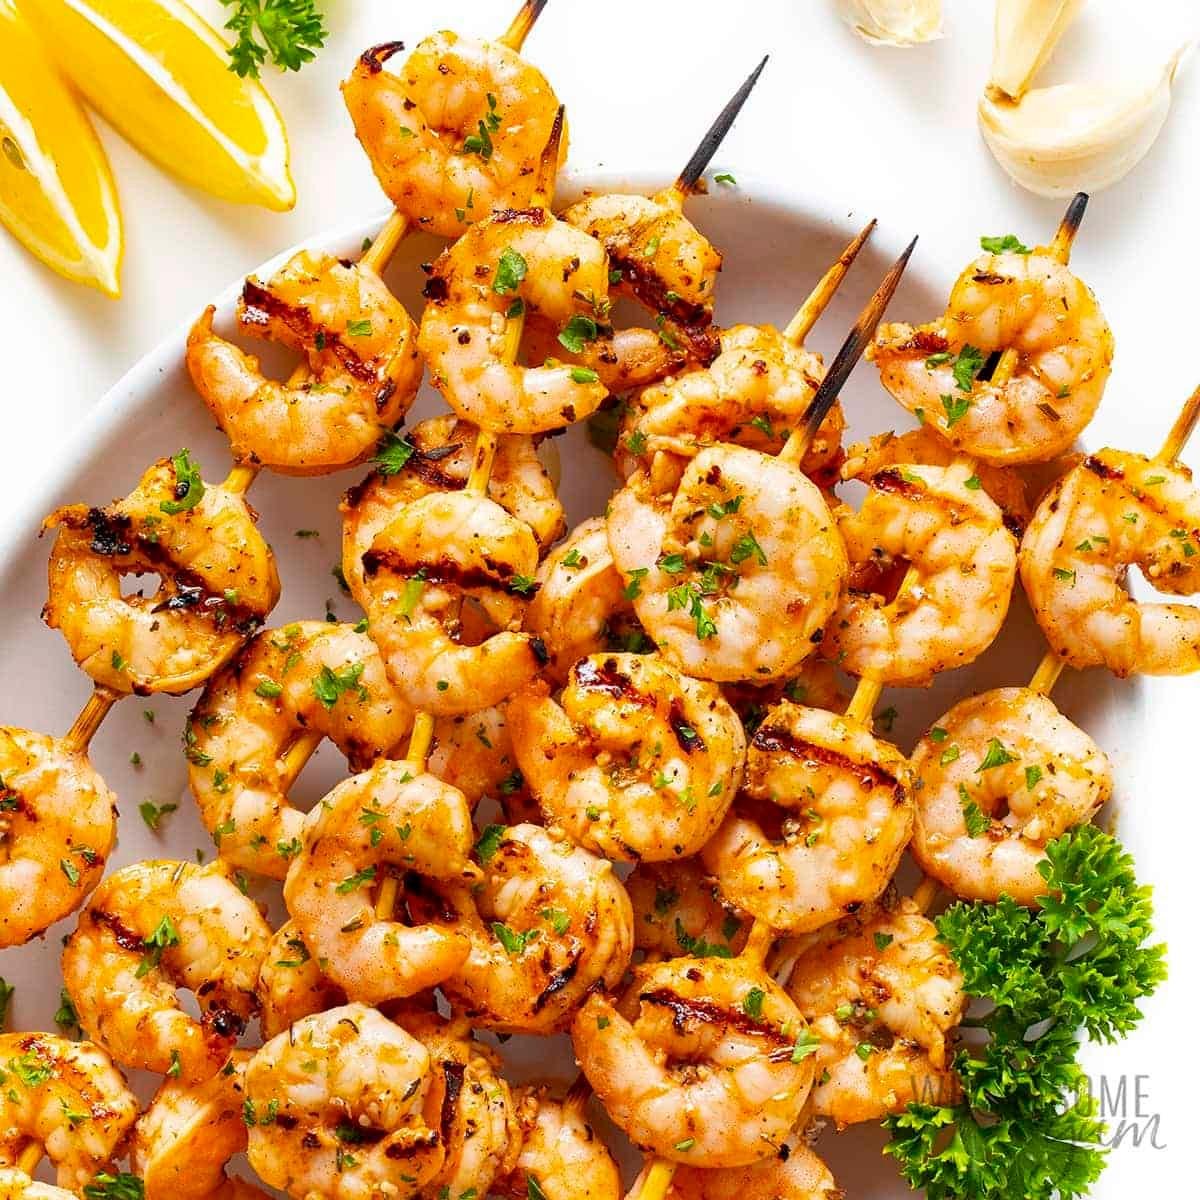 Spice Up Your Summer with Mouthwatering Grilled Shrimp Skewers Recipe